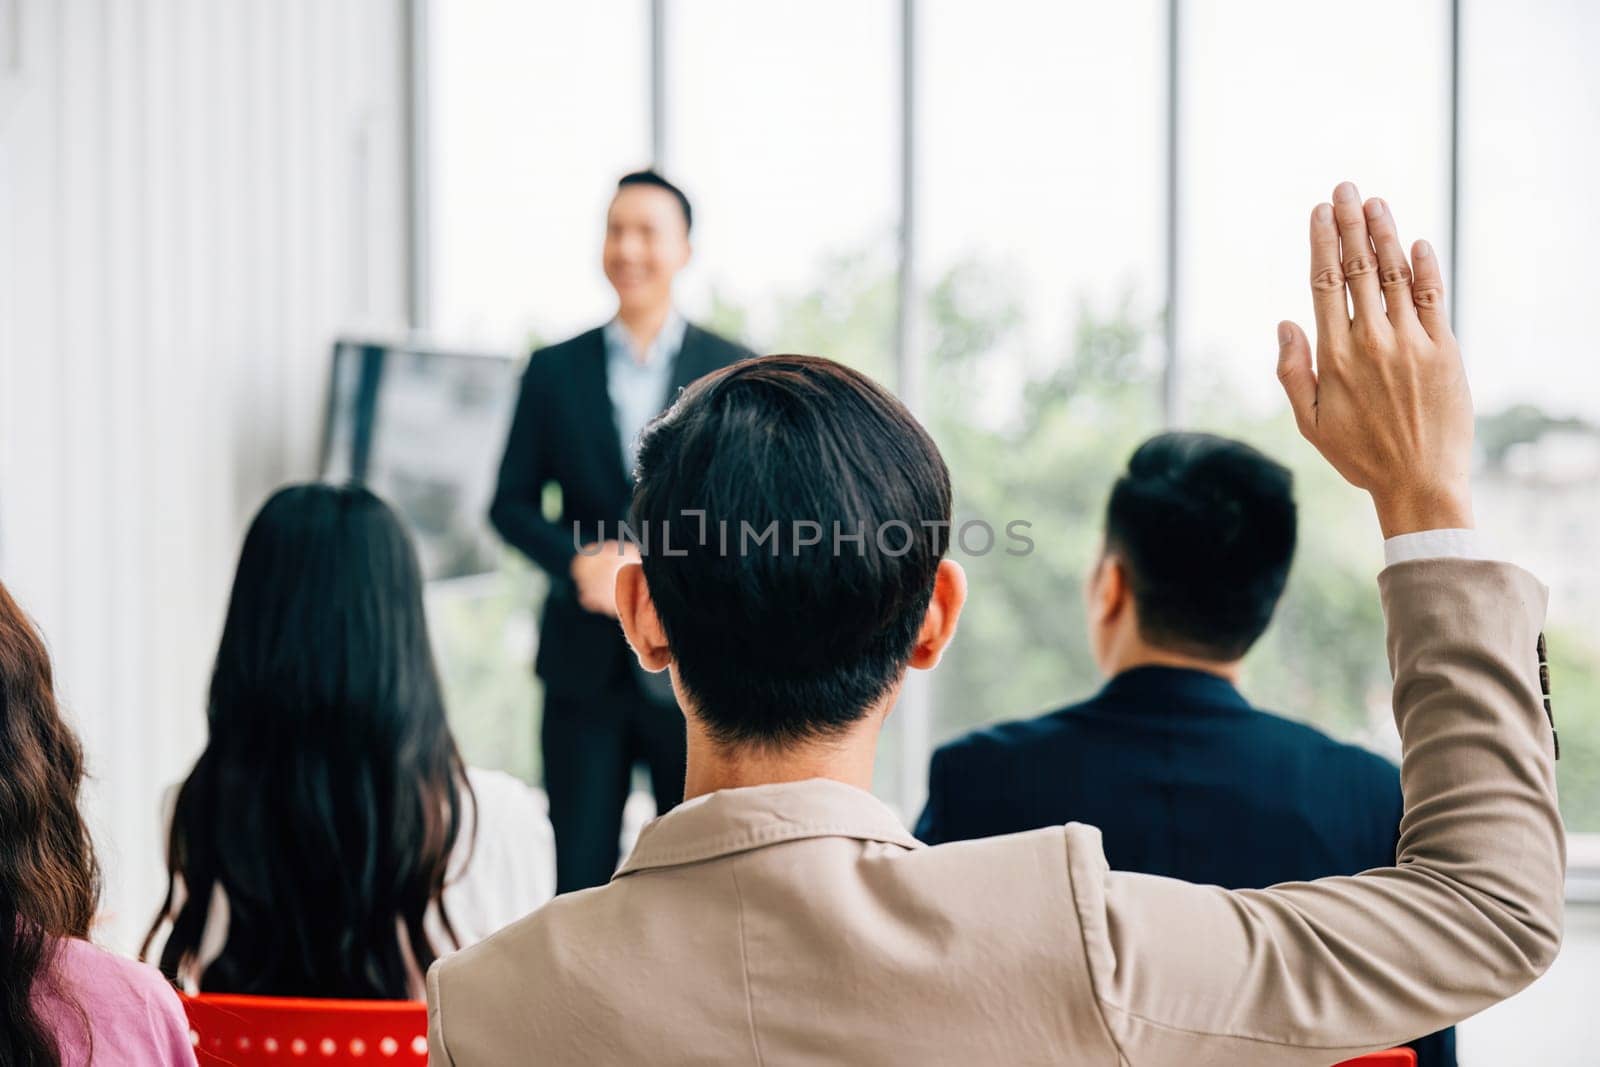 In a conference, hands are raised for questions, reflecting audience engagement and interactive learning. A diverse group participates in a workshop or seminar, fostering teamwork and discussion by Sorapop